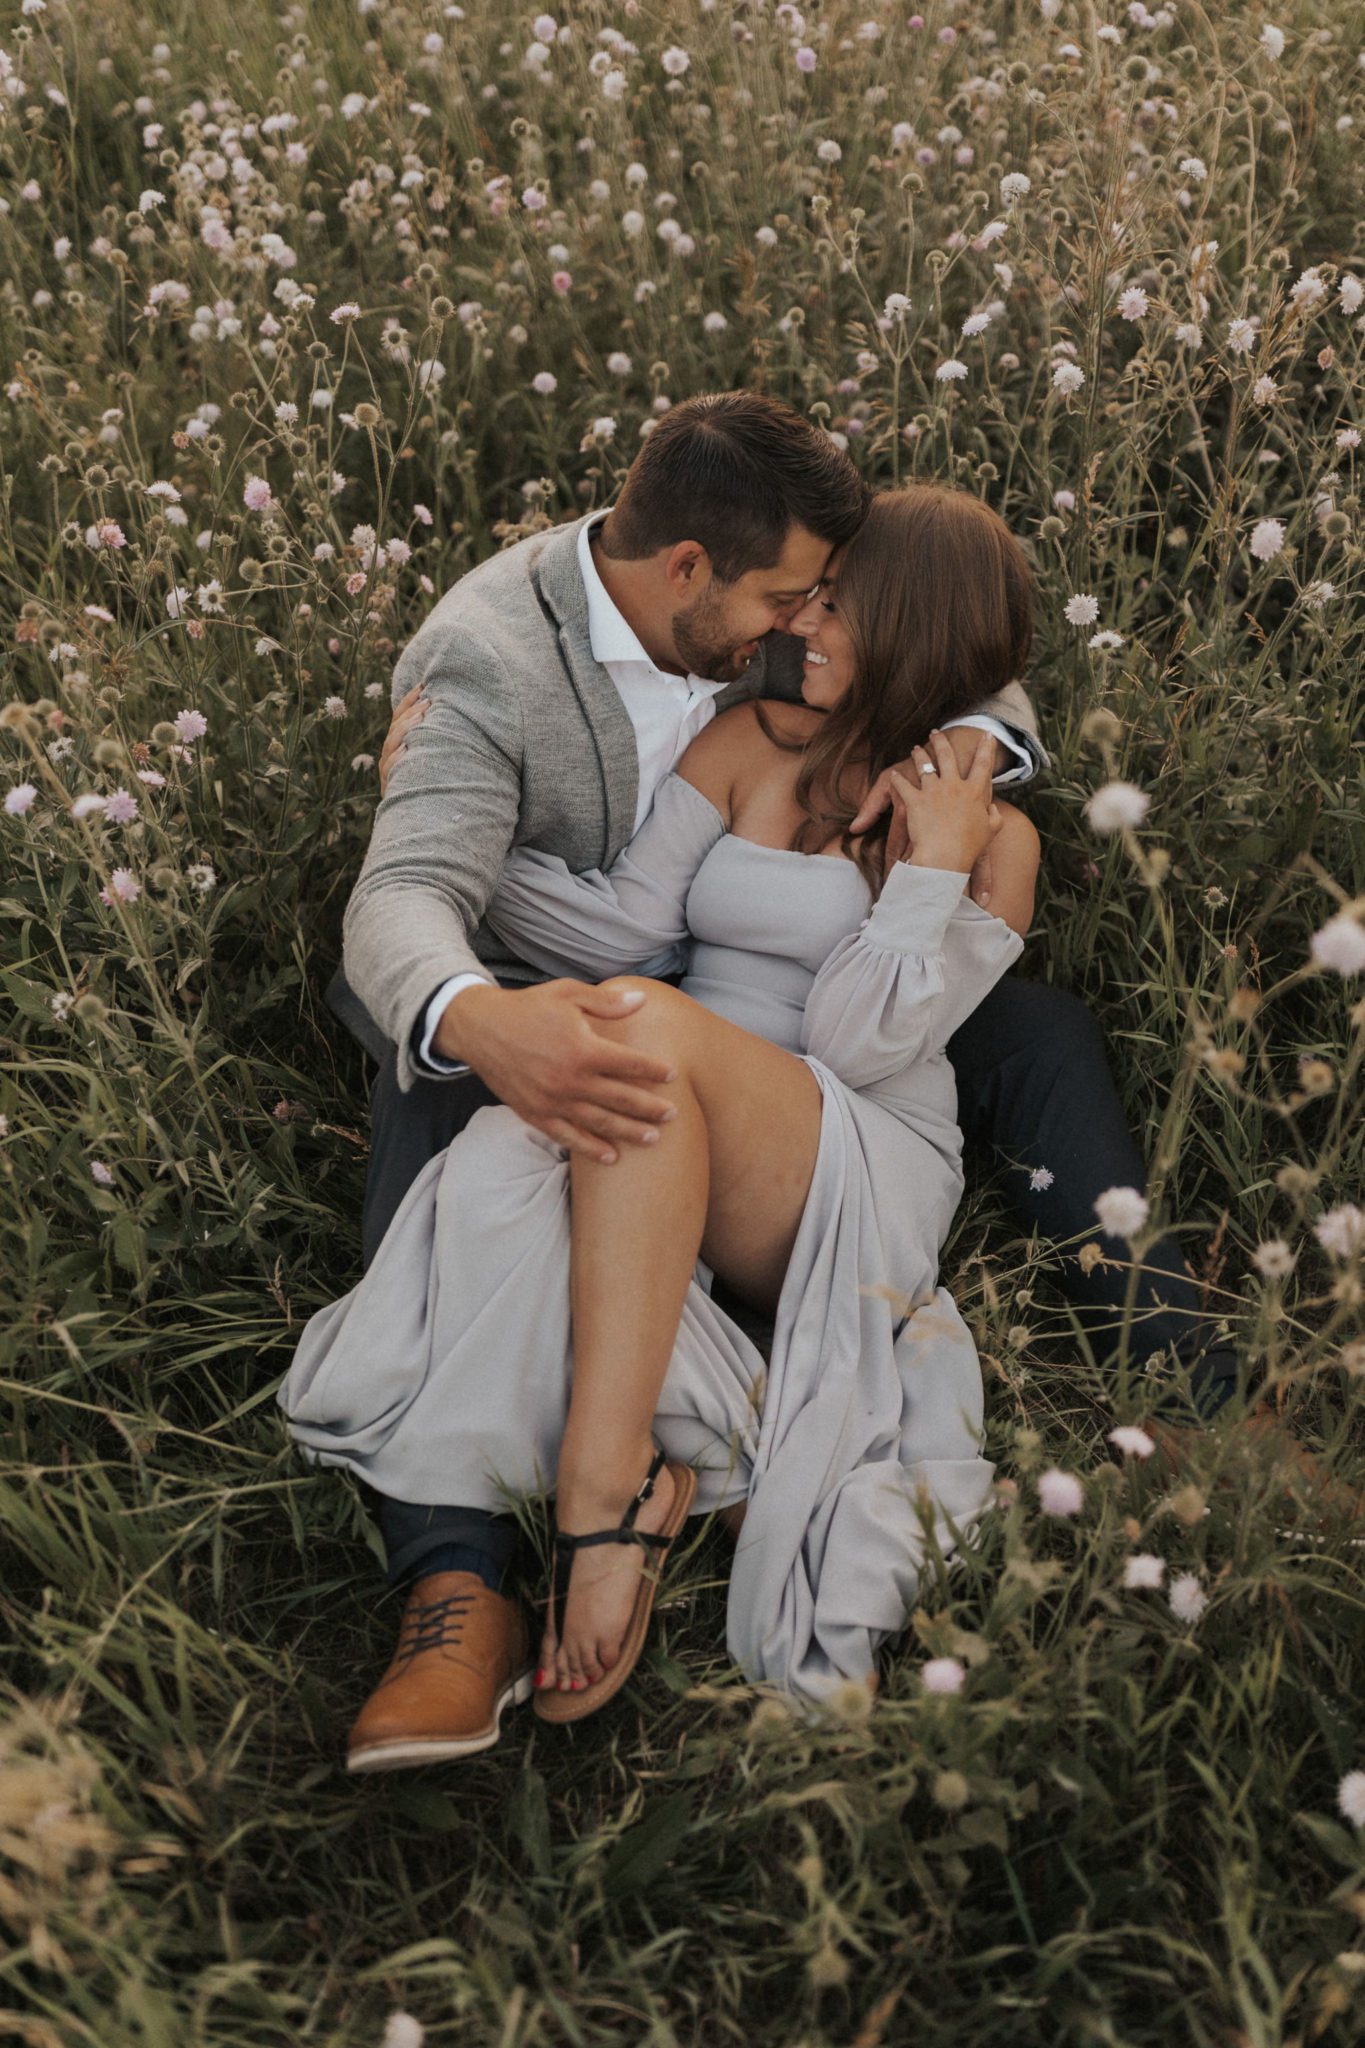 The Dreamiest Sunset Engagement Session Featuring Portraits at Dusk Featured by Brontë Bride